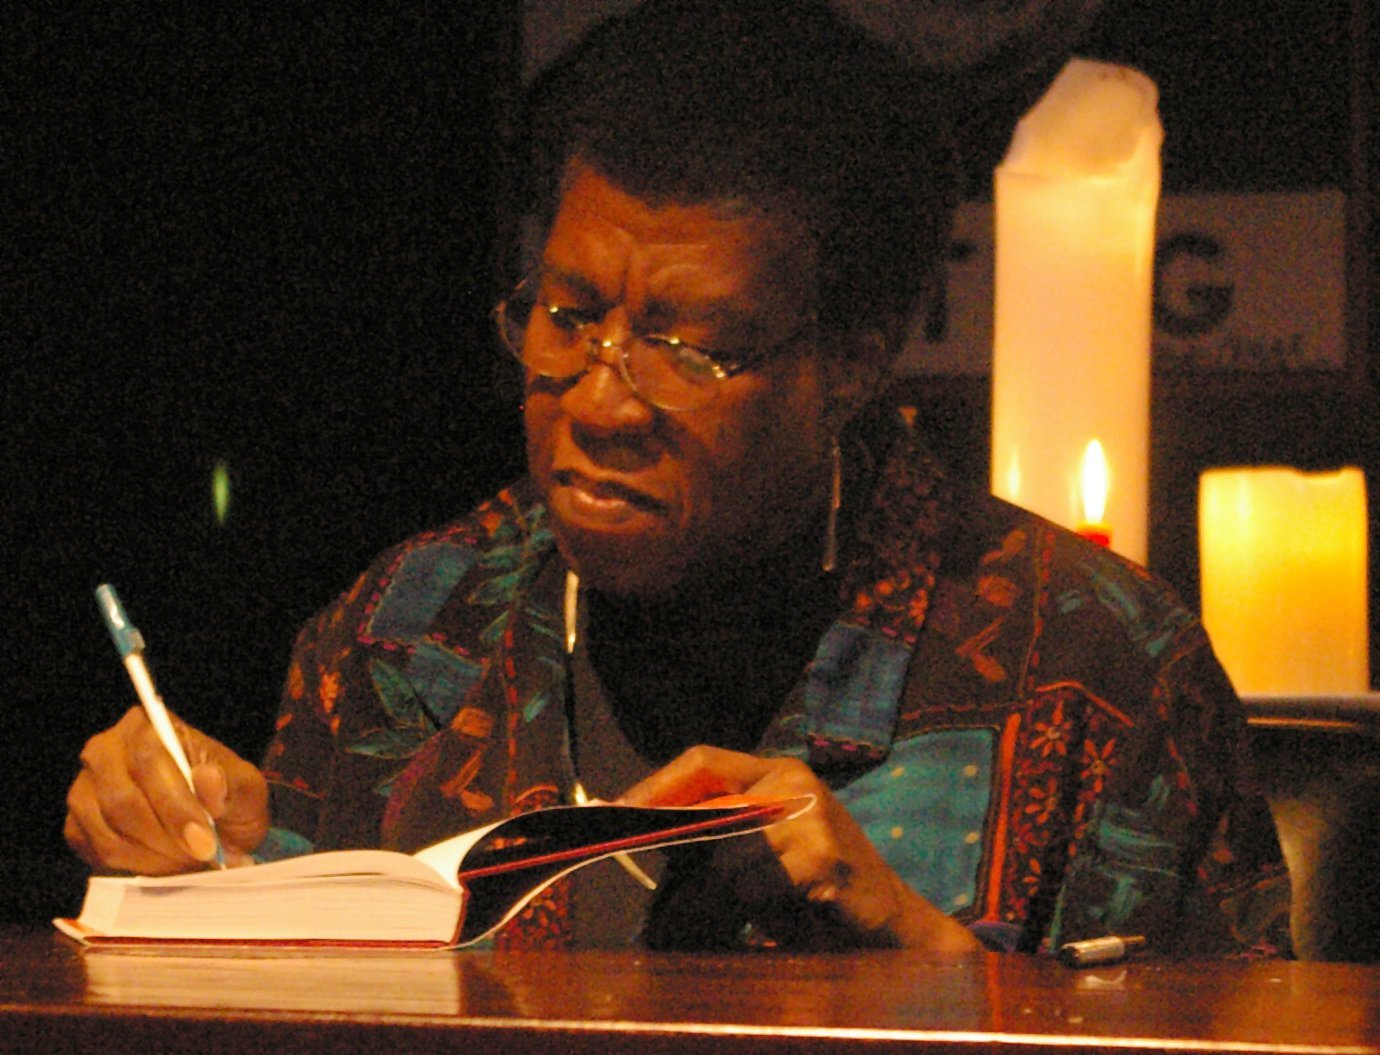 Octavia Estelle Butler signing a copy of "Fledgling" after speaking and answering questions from the audience on October 25, 2005. | Photo: Nikolas Coukouma, Butler signing, CC BY-SA 2.5